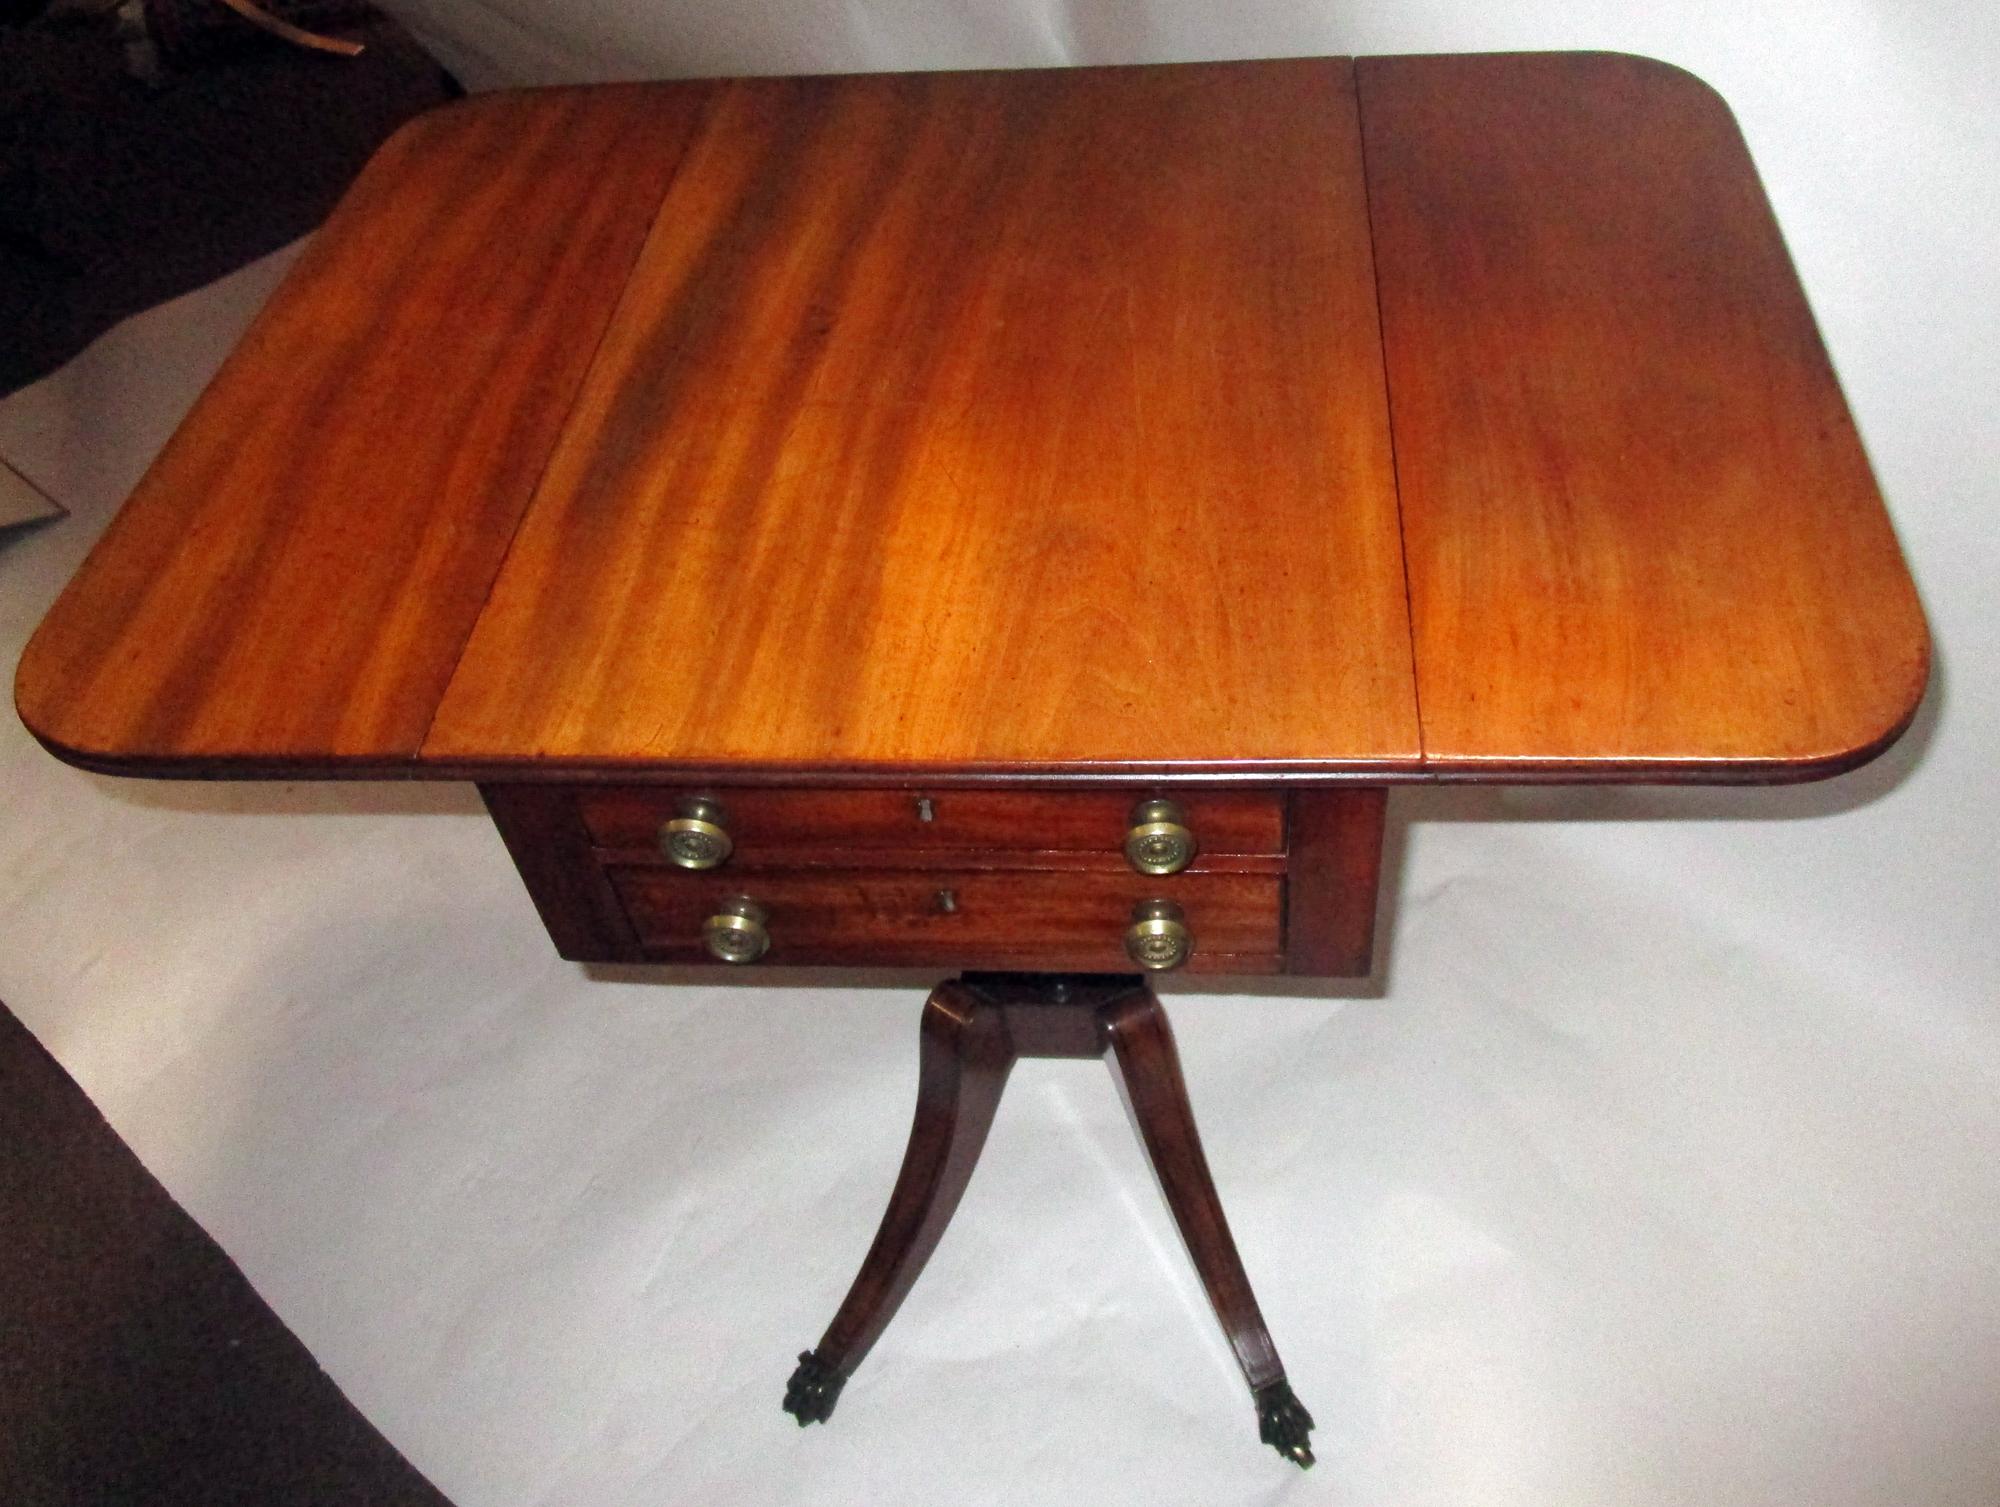 George III Sheraton period English mahogany side/work table with two shallow drawers at one end and faux drawers at other. Features include splayed legs with inlay raising to rectilinear platform with double turned columns supporting the body. Two